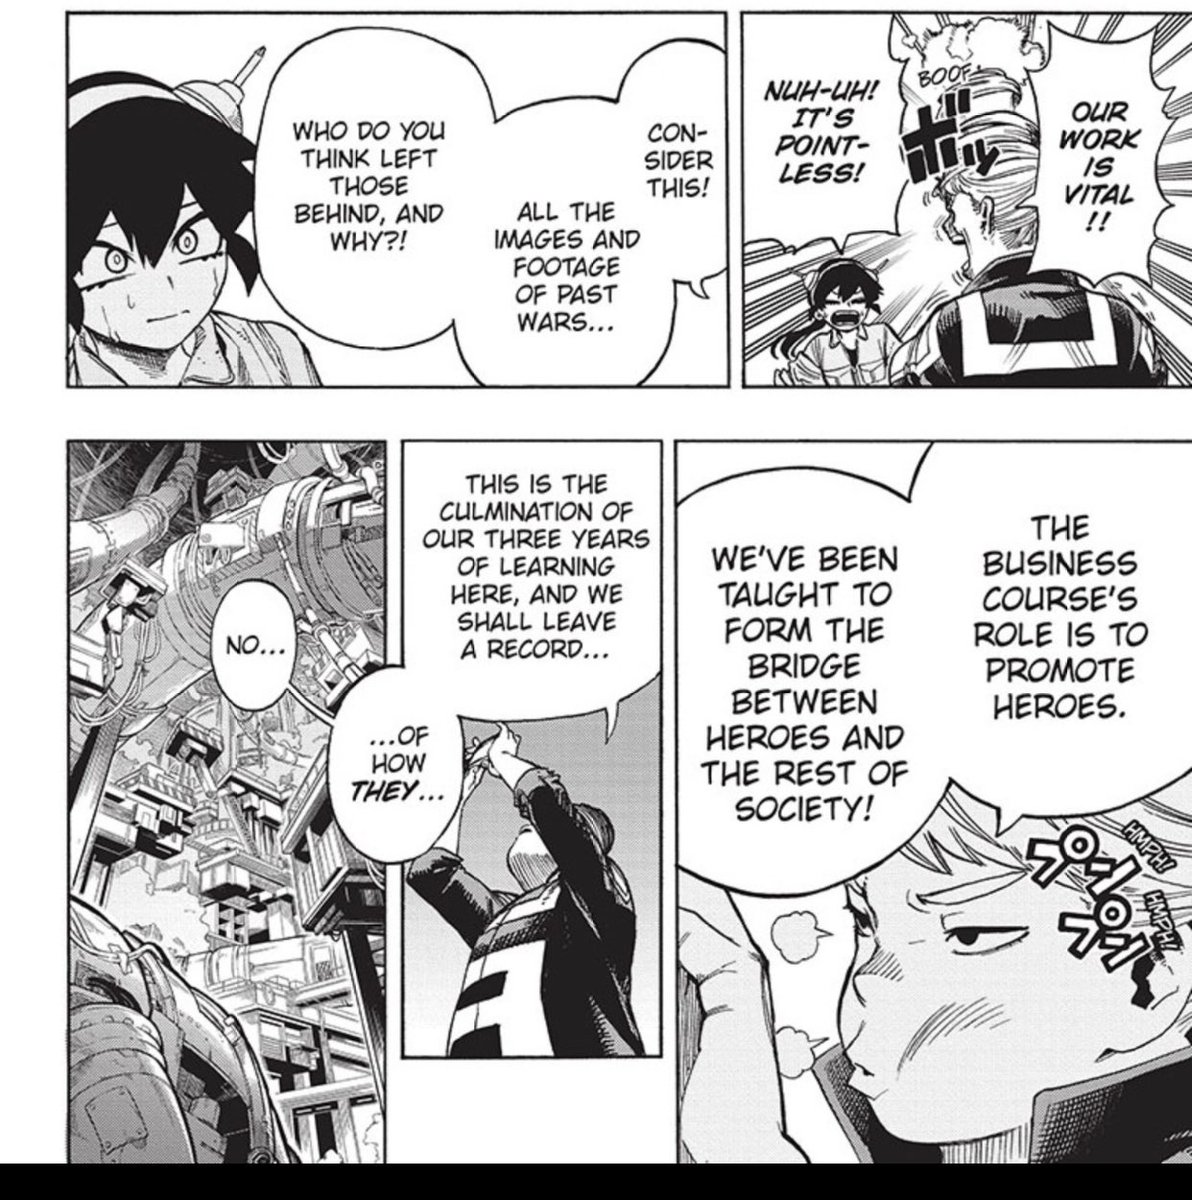 mha 359

hrhjtg its insane to me that theyre still!! still arguing to tell the story from the winners point of view!! which is literally the reason the villains are ostracized for being different (thus turning them evil)!! bro!!!! l 